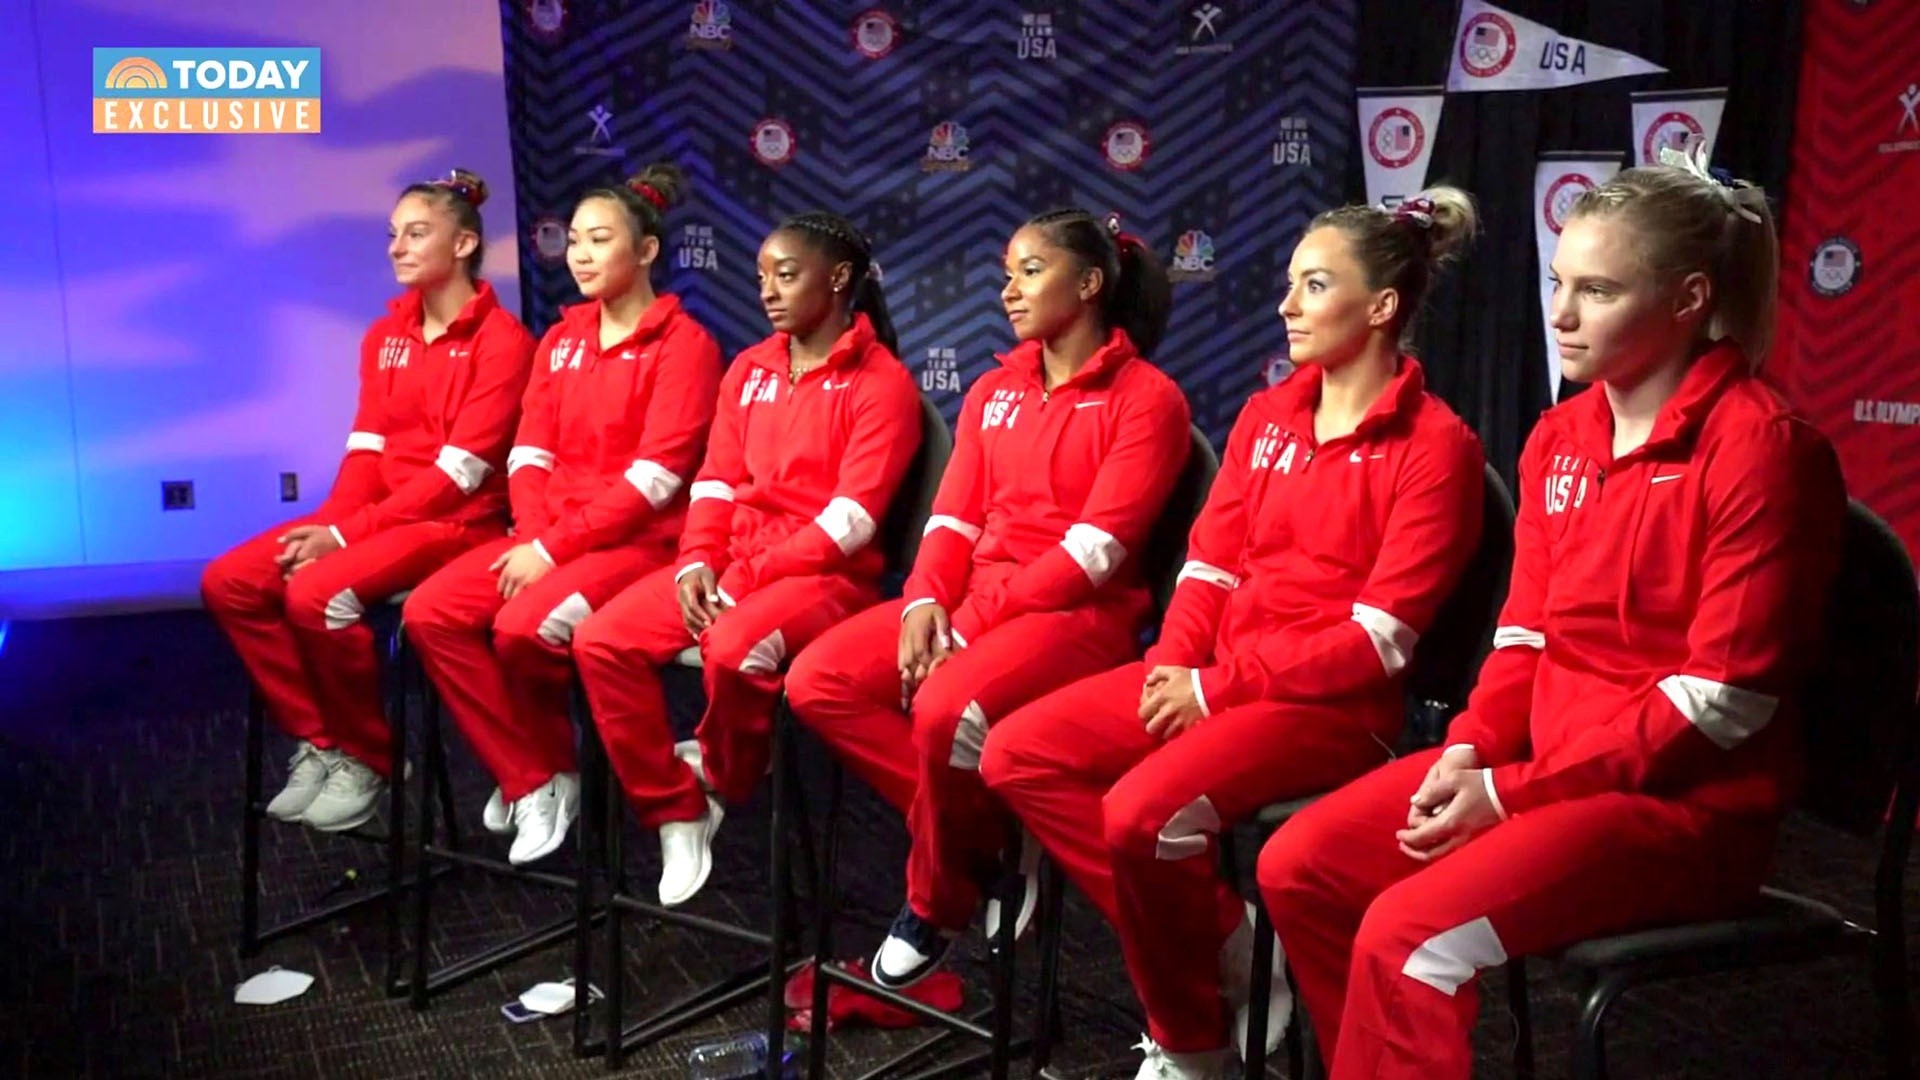 Meet The 6 Gymnasts Who Will Lead Team Usa At The Olympics